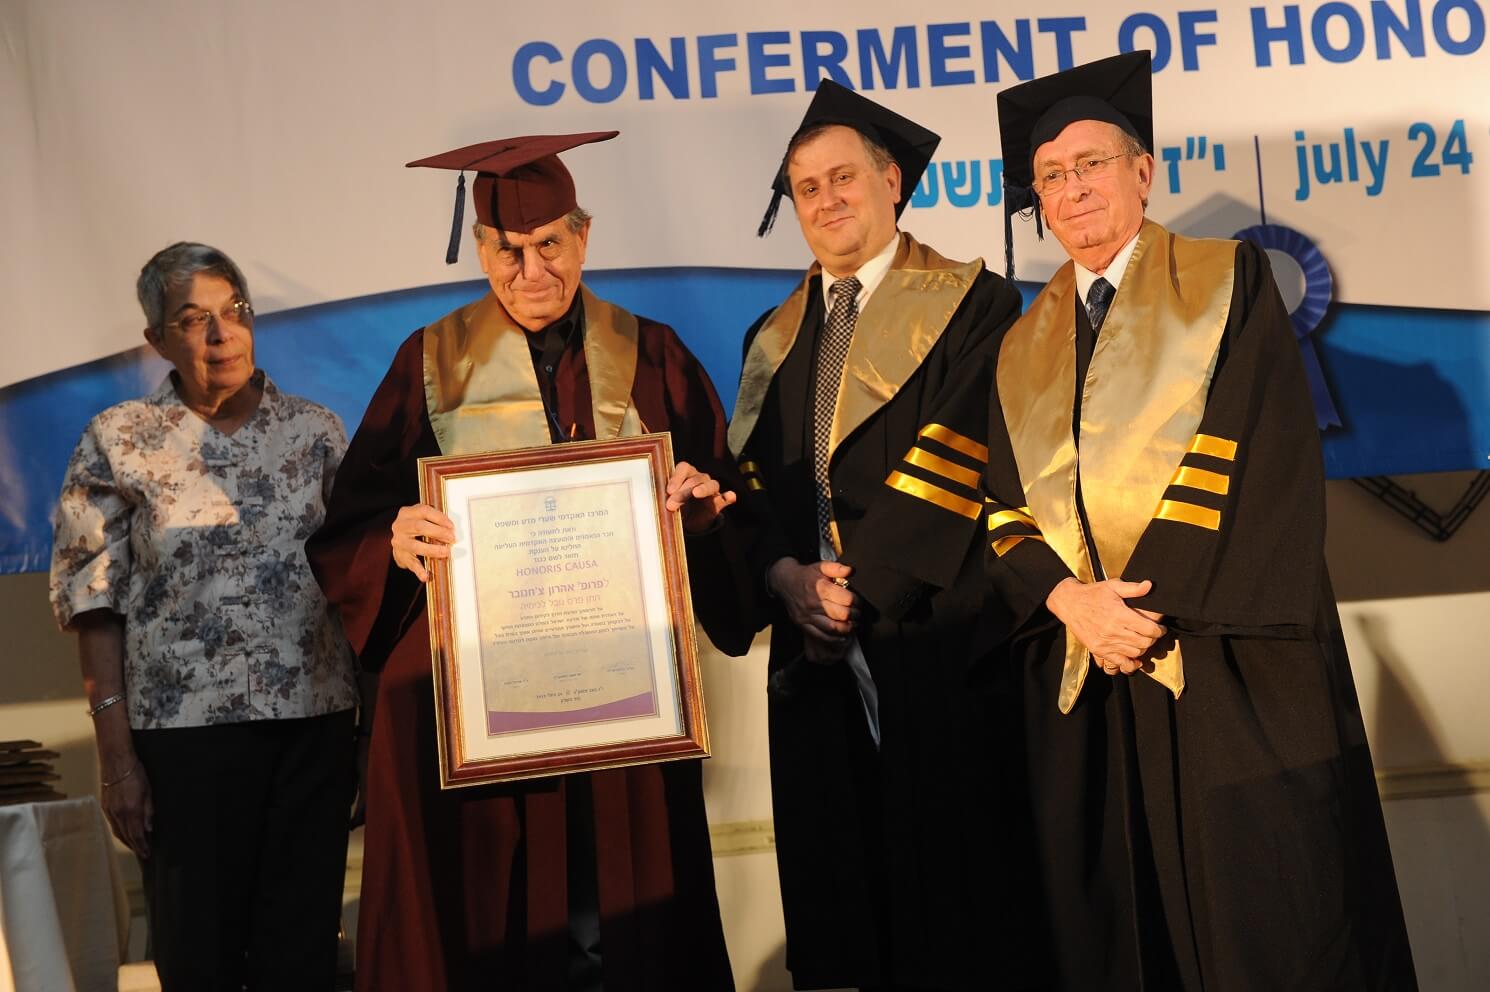 Nobel laureate Aharon Chahanover, president of the Gates of Law Prof. Binyamin Shredani and dean of the law school of the Gates of Law Dr. Aviad HaCohen at the conferment of honorary degrees, July 2013. Photo: Tamir Bergig